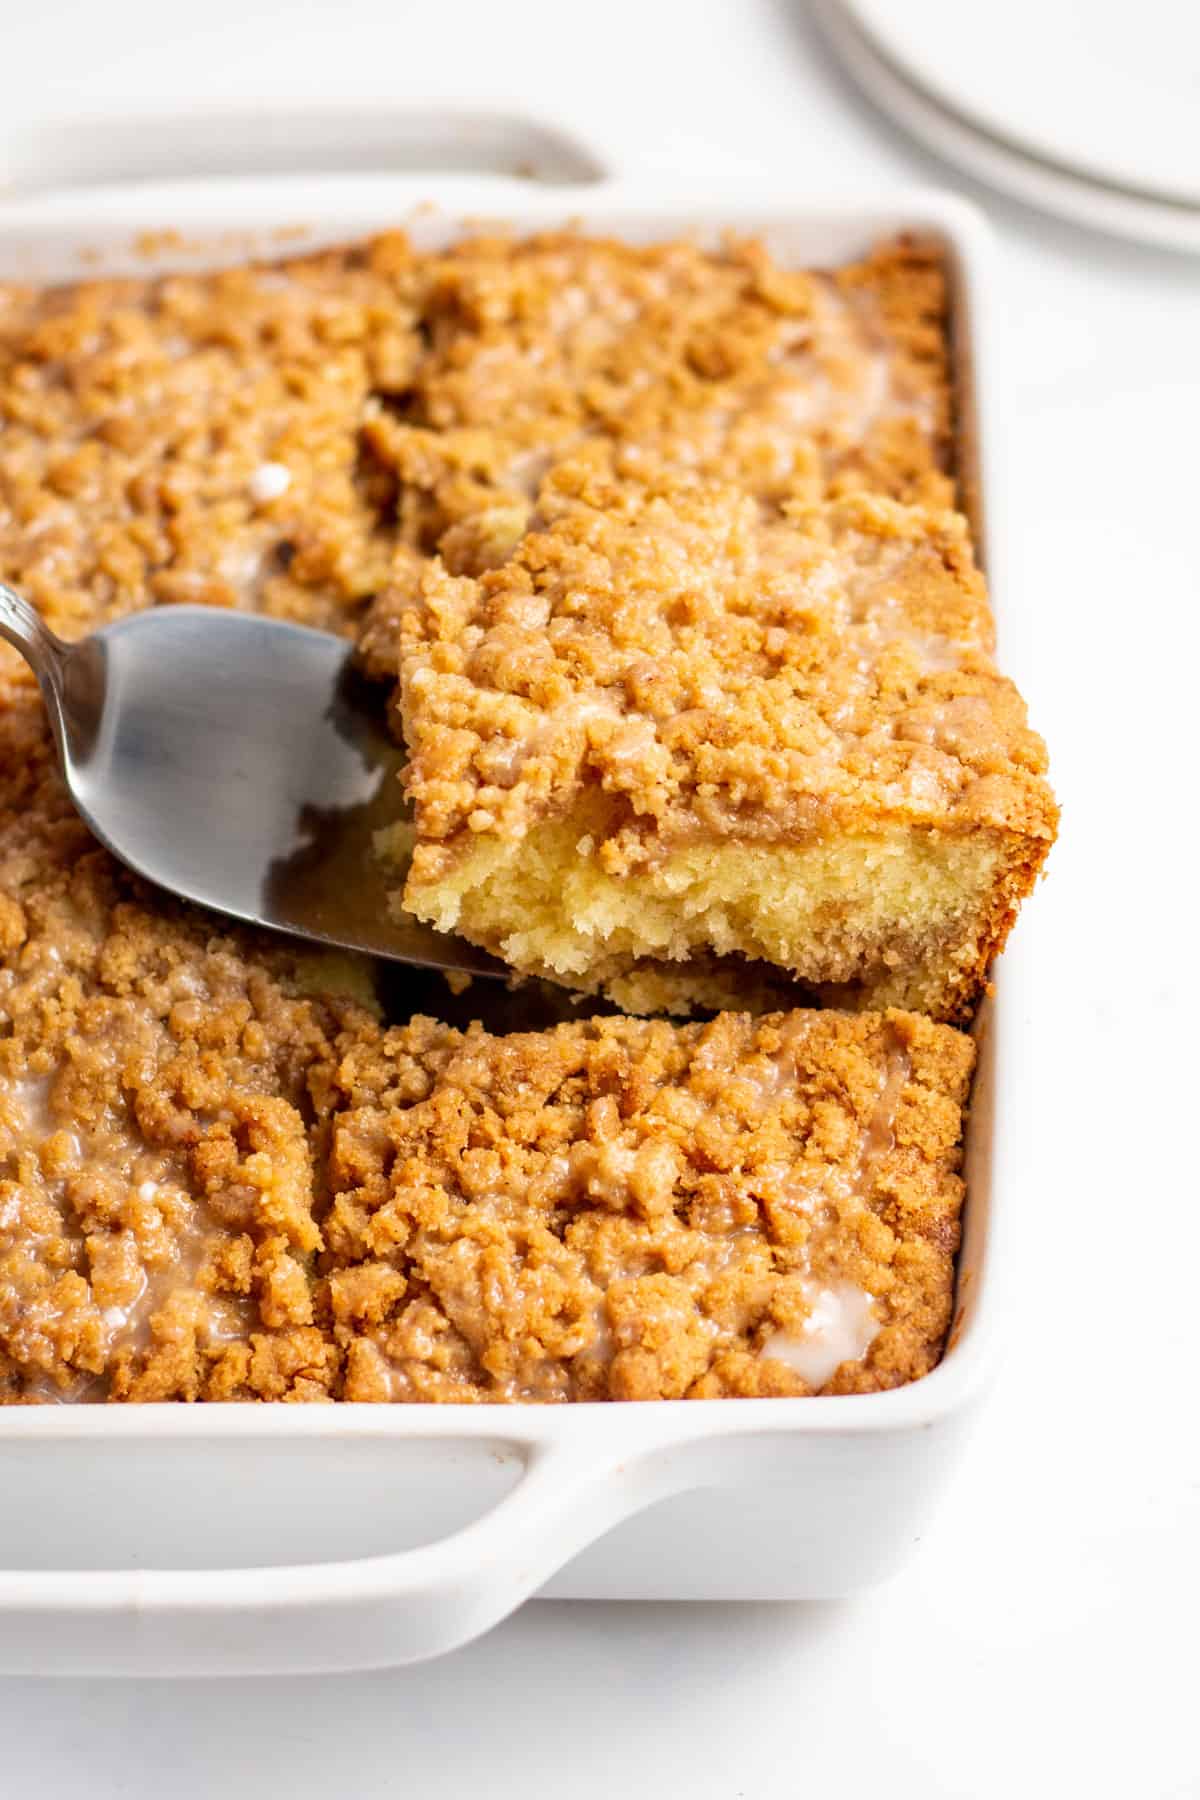 cake mix sour cream coffee cake baked in a casserole cake dish cut in squares